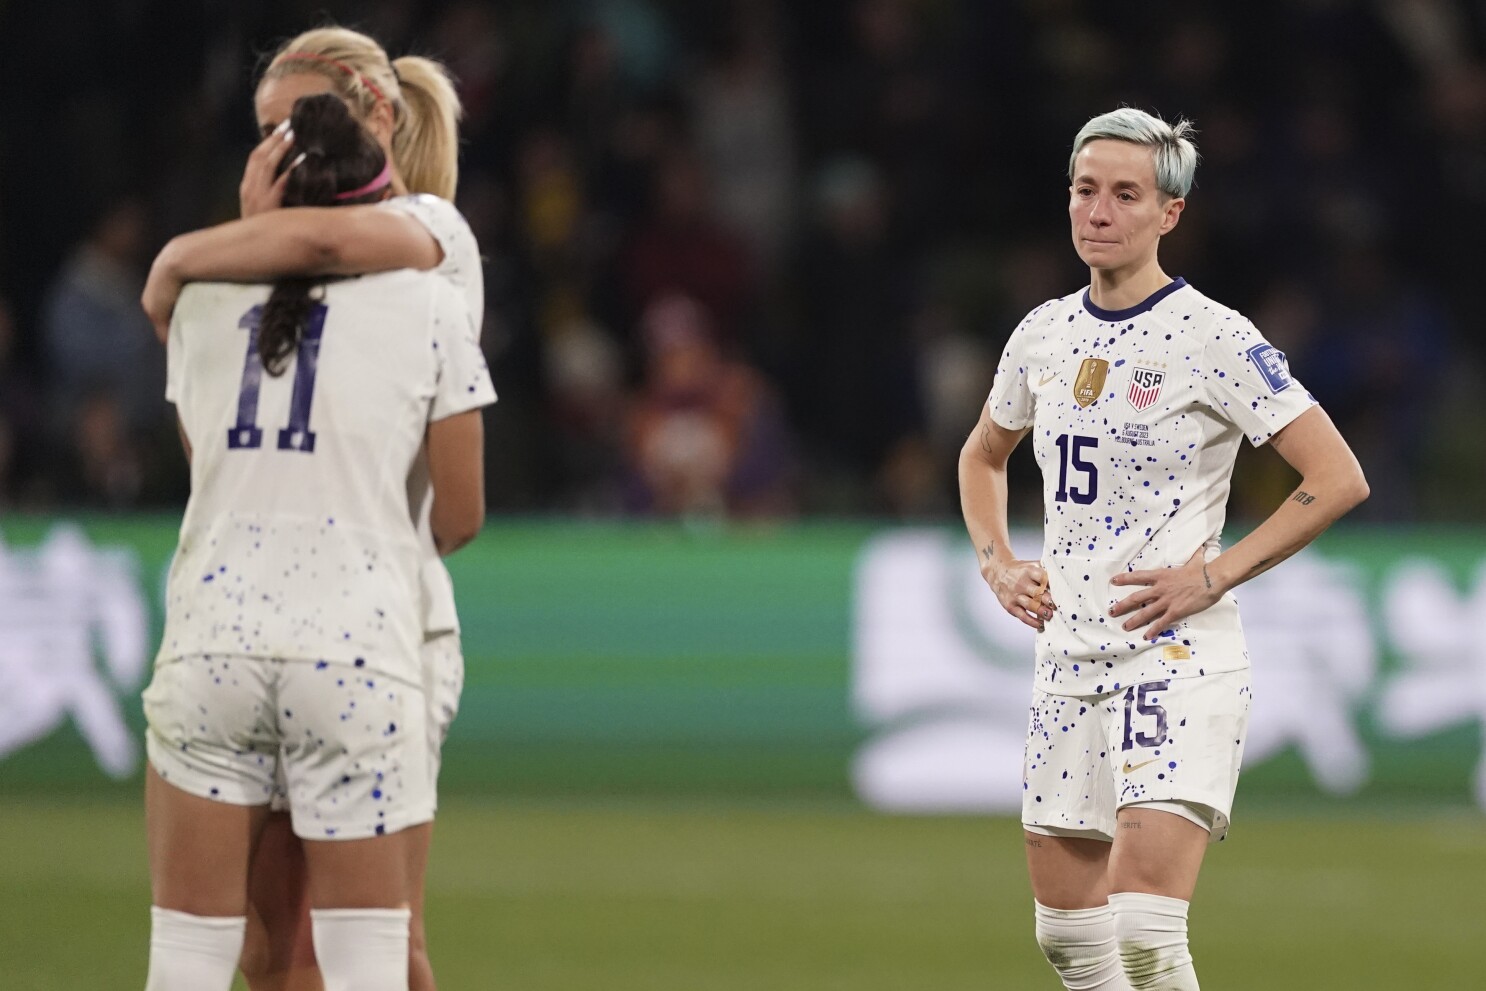 SOCCER/ Players converted just 4 of the first 8 penalty kicks at the  Women's World Cup